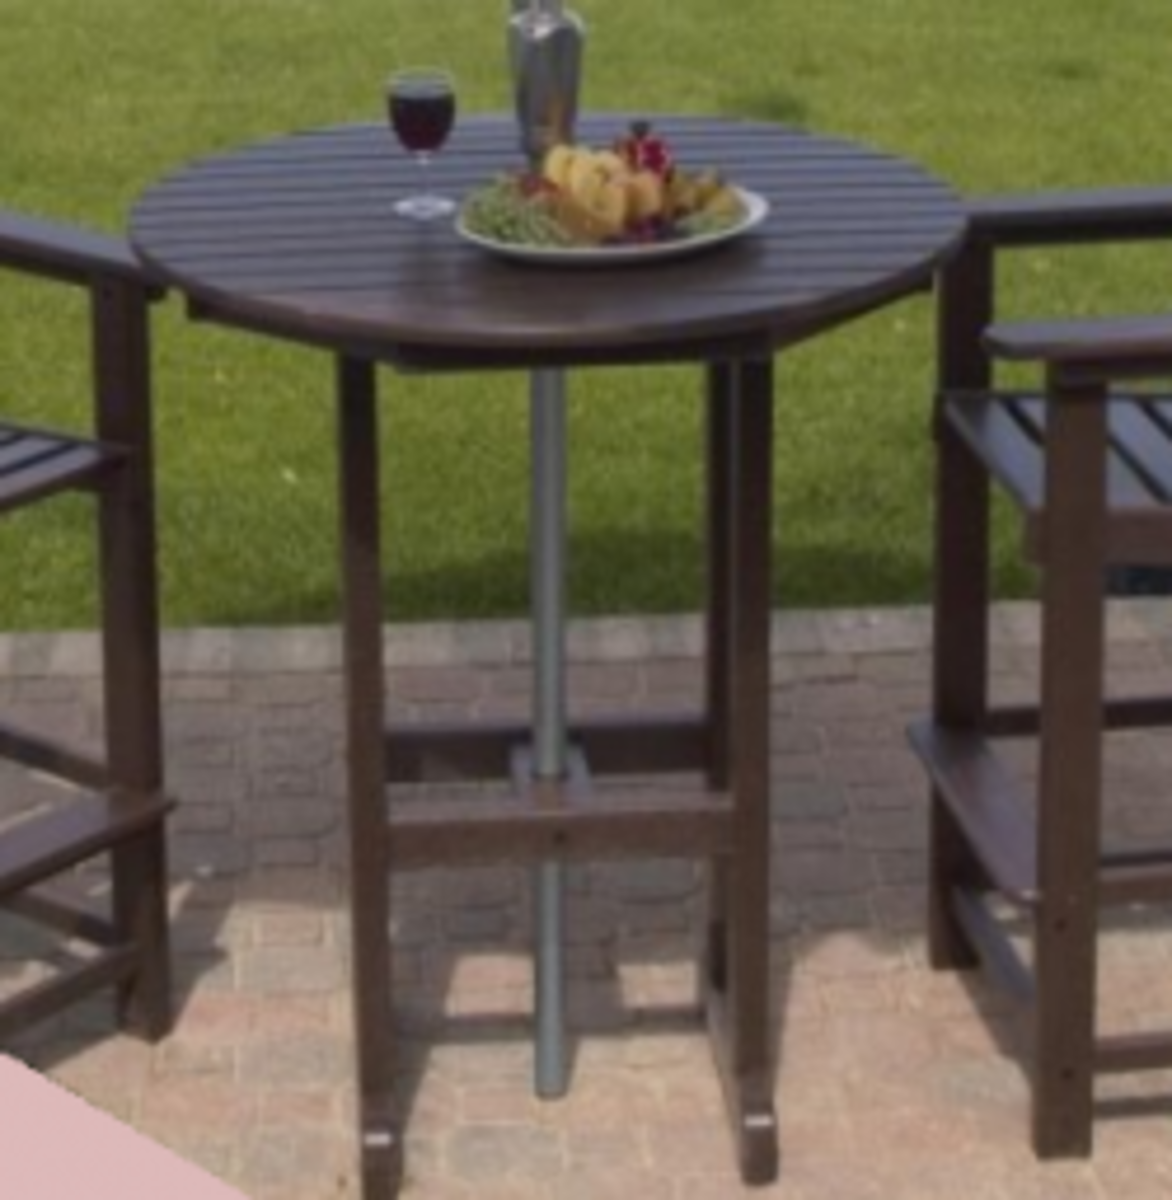 The Tall Patio Table Set